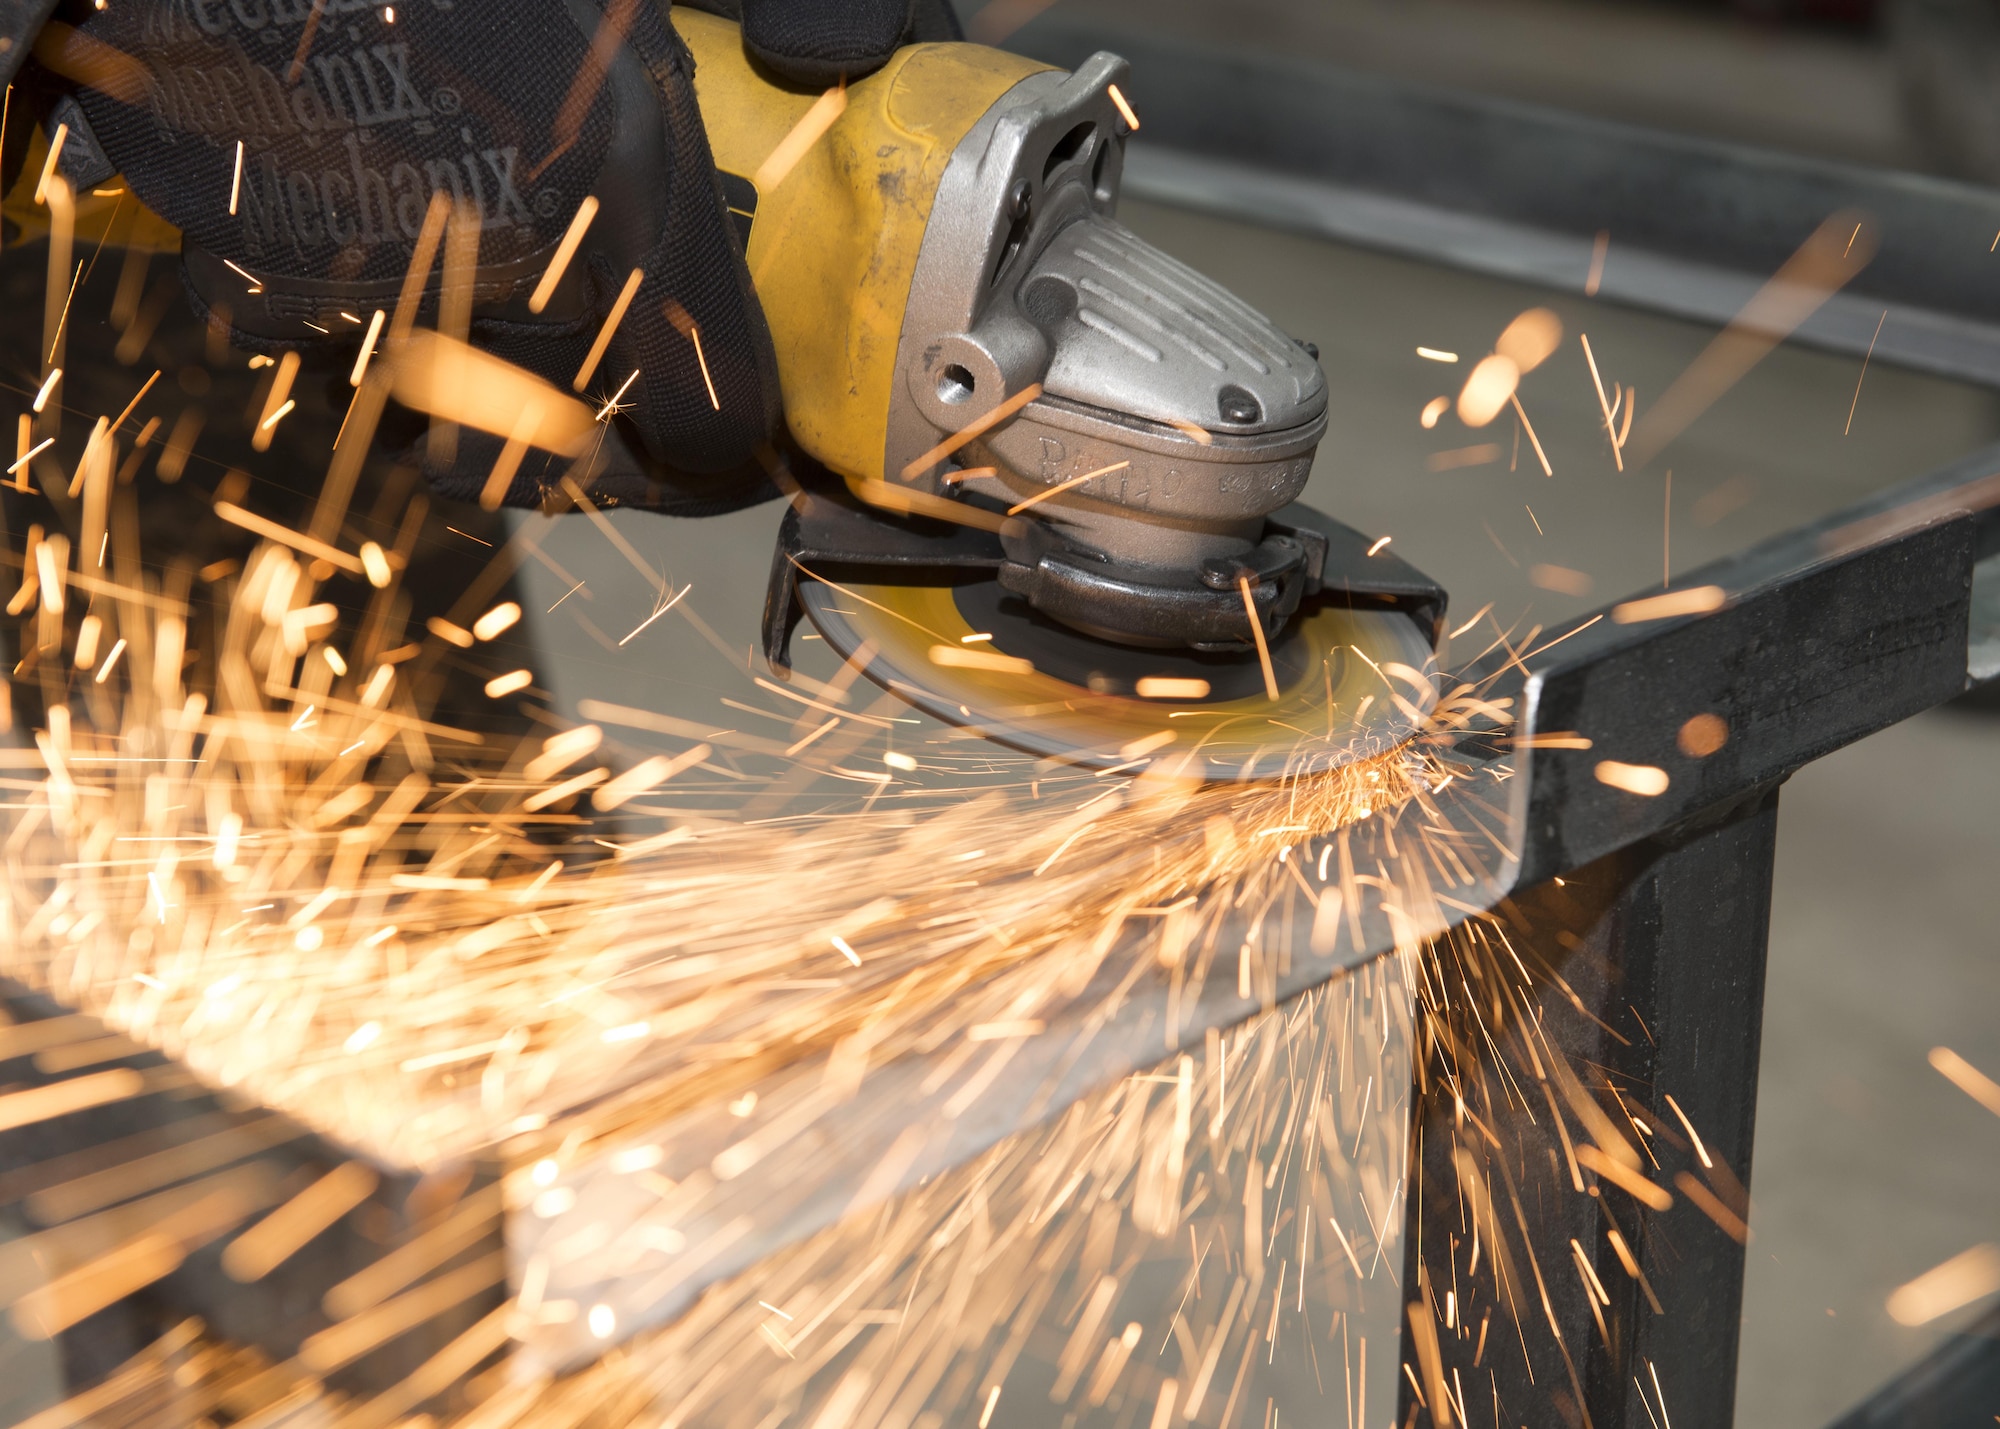 Senior Airman Cory Swan, 512th Maintenance Squadron metals technician, uses an angle grinder to remove a piece of metal from a metal frame Sept. 19, 2016, at Dover Air Force Base, Del. This frame was designed and fabricated specifically for Air Force Mortuary Affairs Operations transfer vehicles to carry transfer cases. (U.S. Air Force photo by Senior Airman Zachary Cacicia)